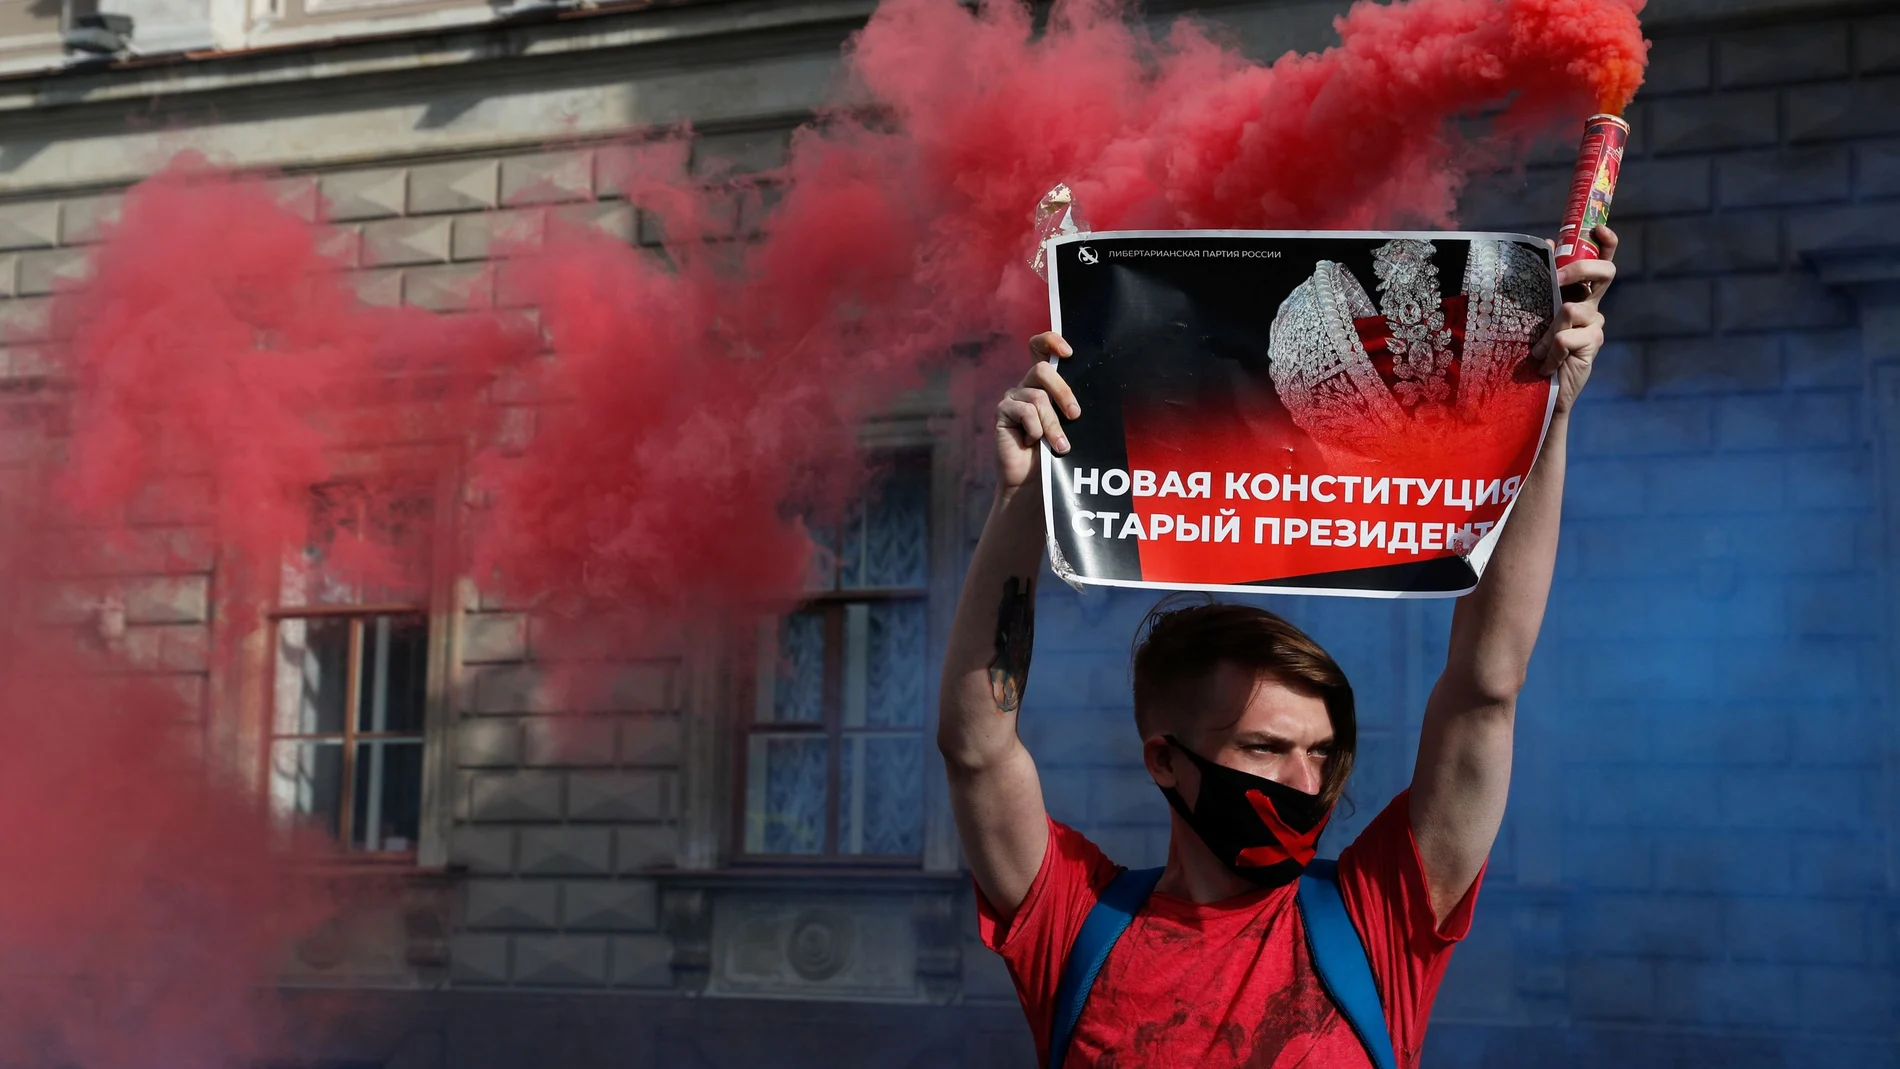 An activist takes part in a protest against amendments to Russia's Constitution in central Saint Petersburg